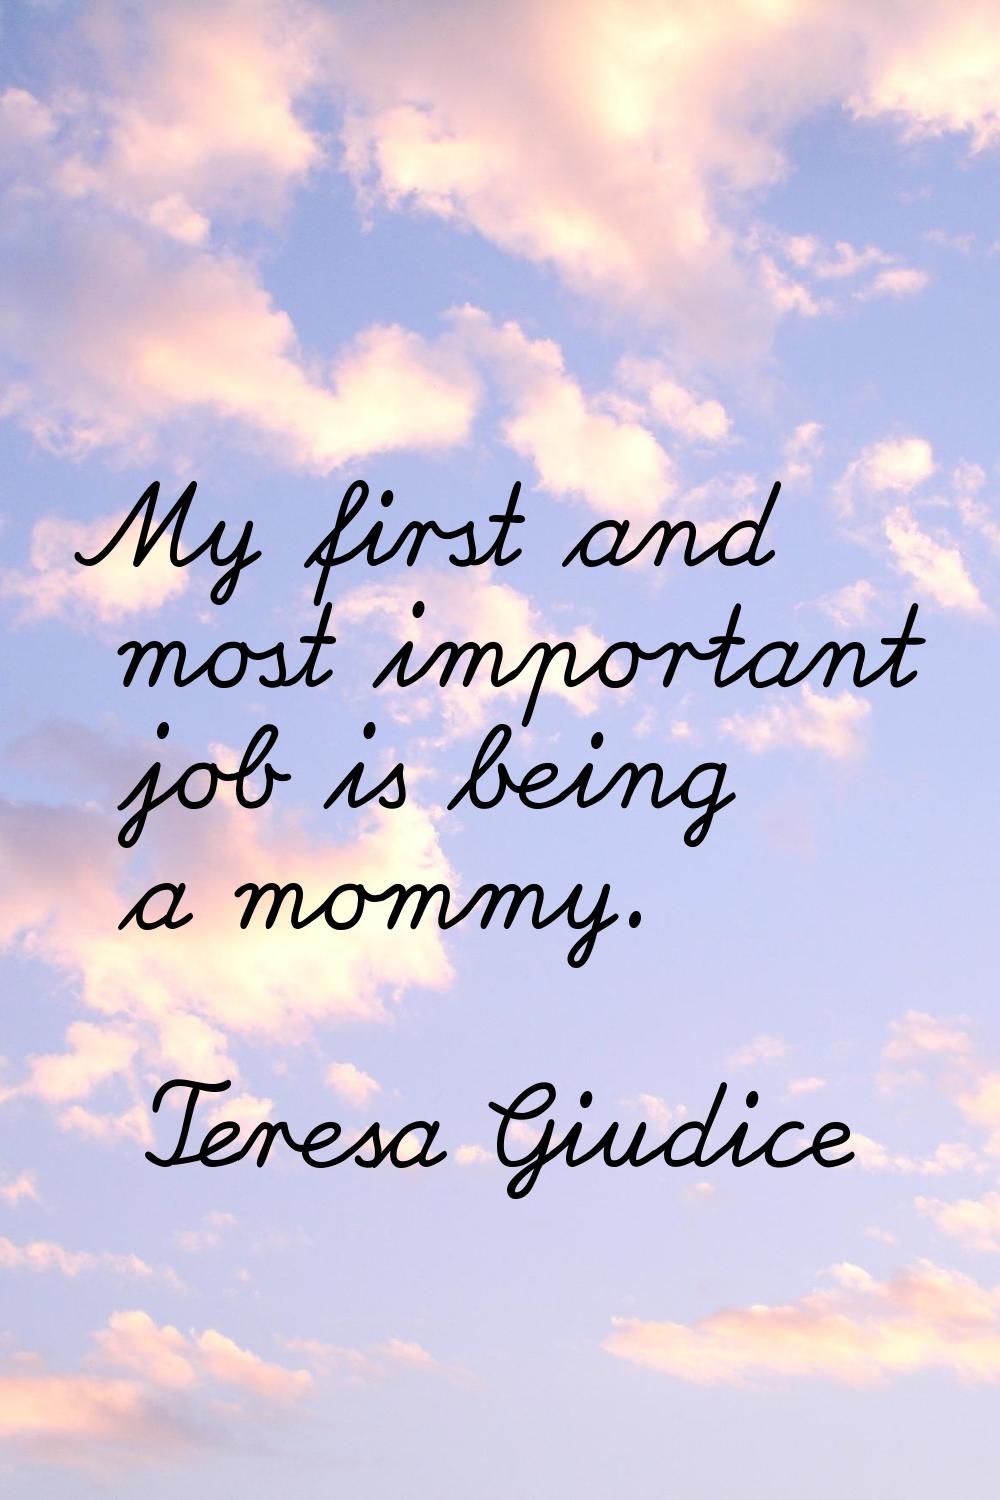 My first and most important job is being a mommy.